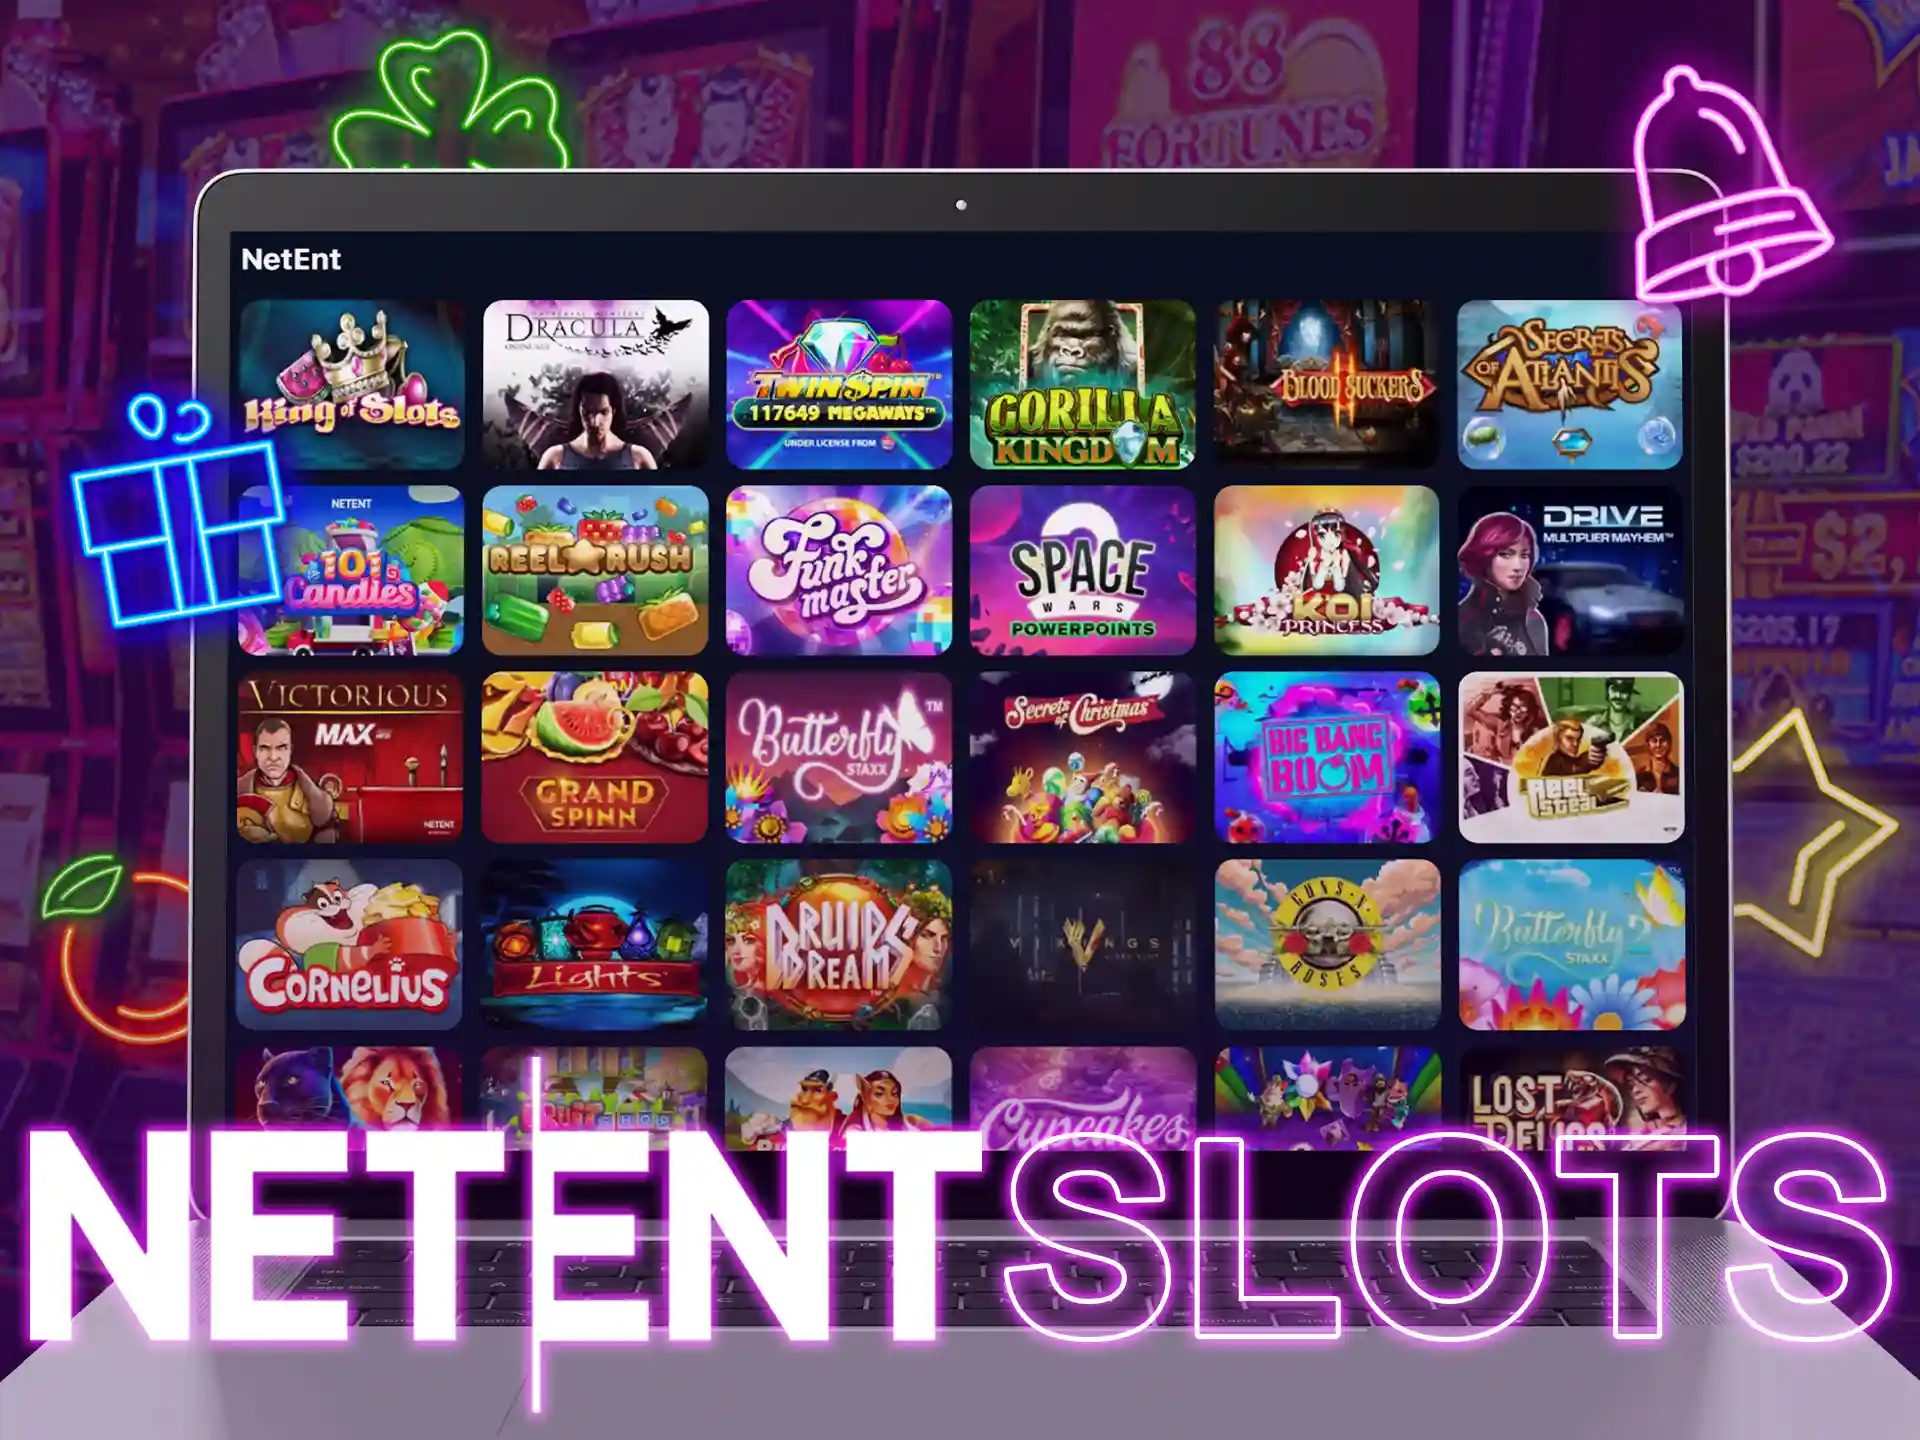 Netent has around 400 slots with different categories and designs.